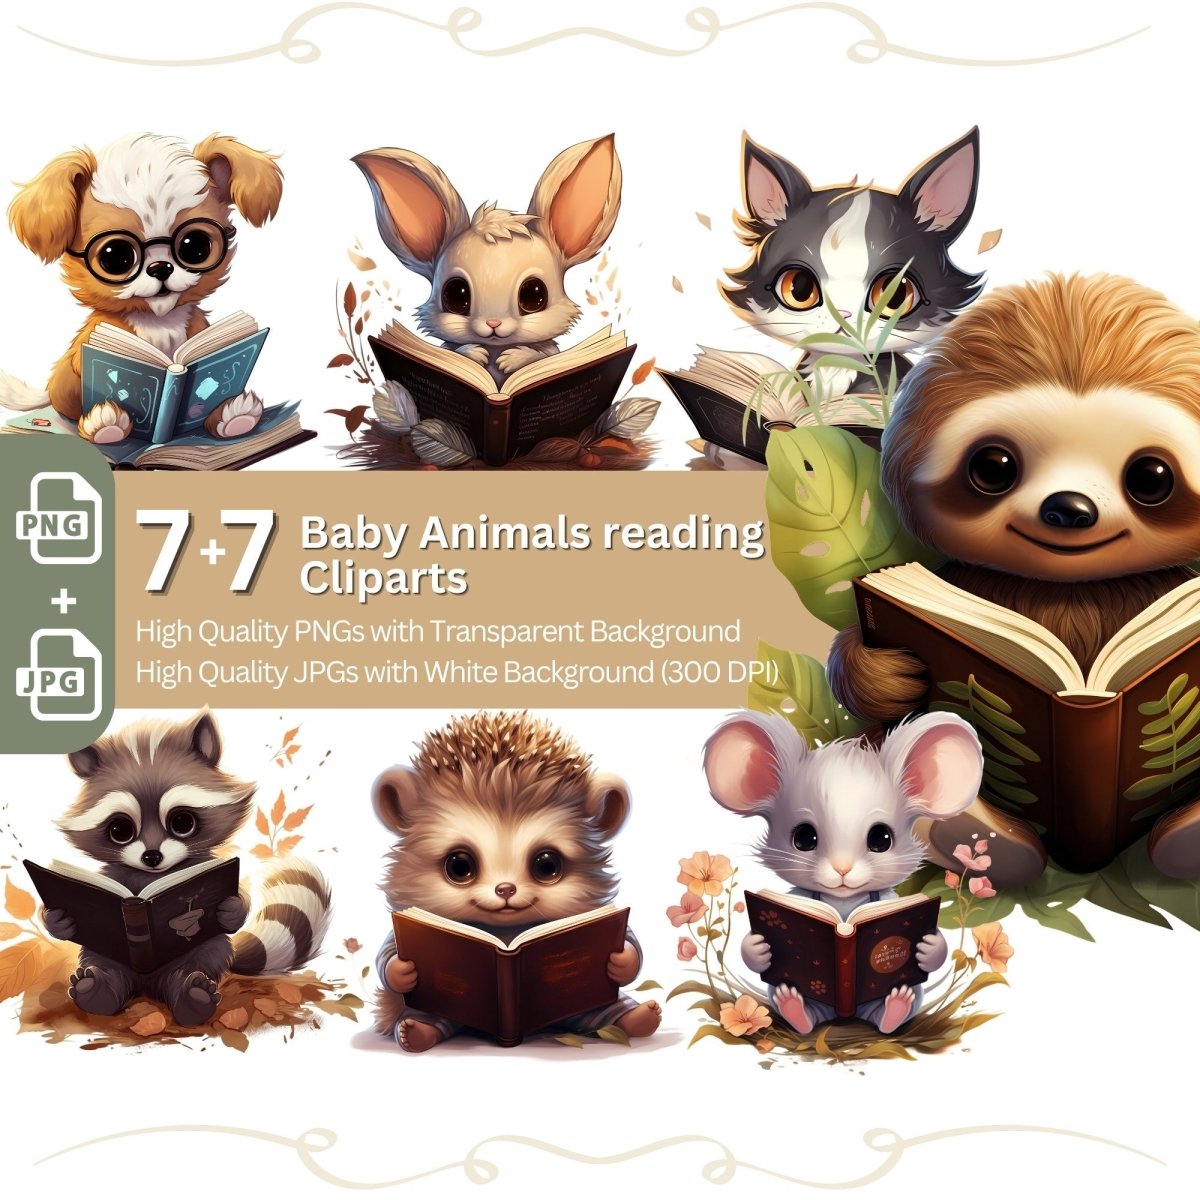 Baby Animals reading a Book Clipart 7+7 PNG/JPG Bundle Bookworm - Everything Pixel